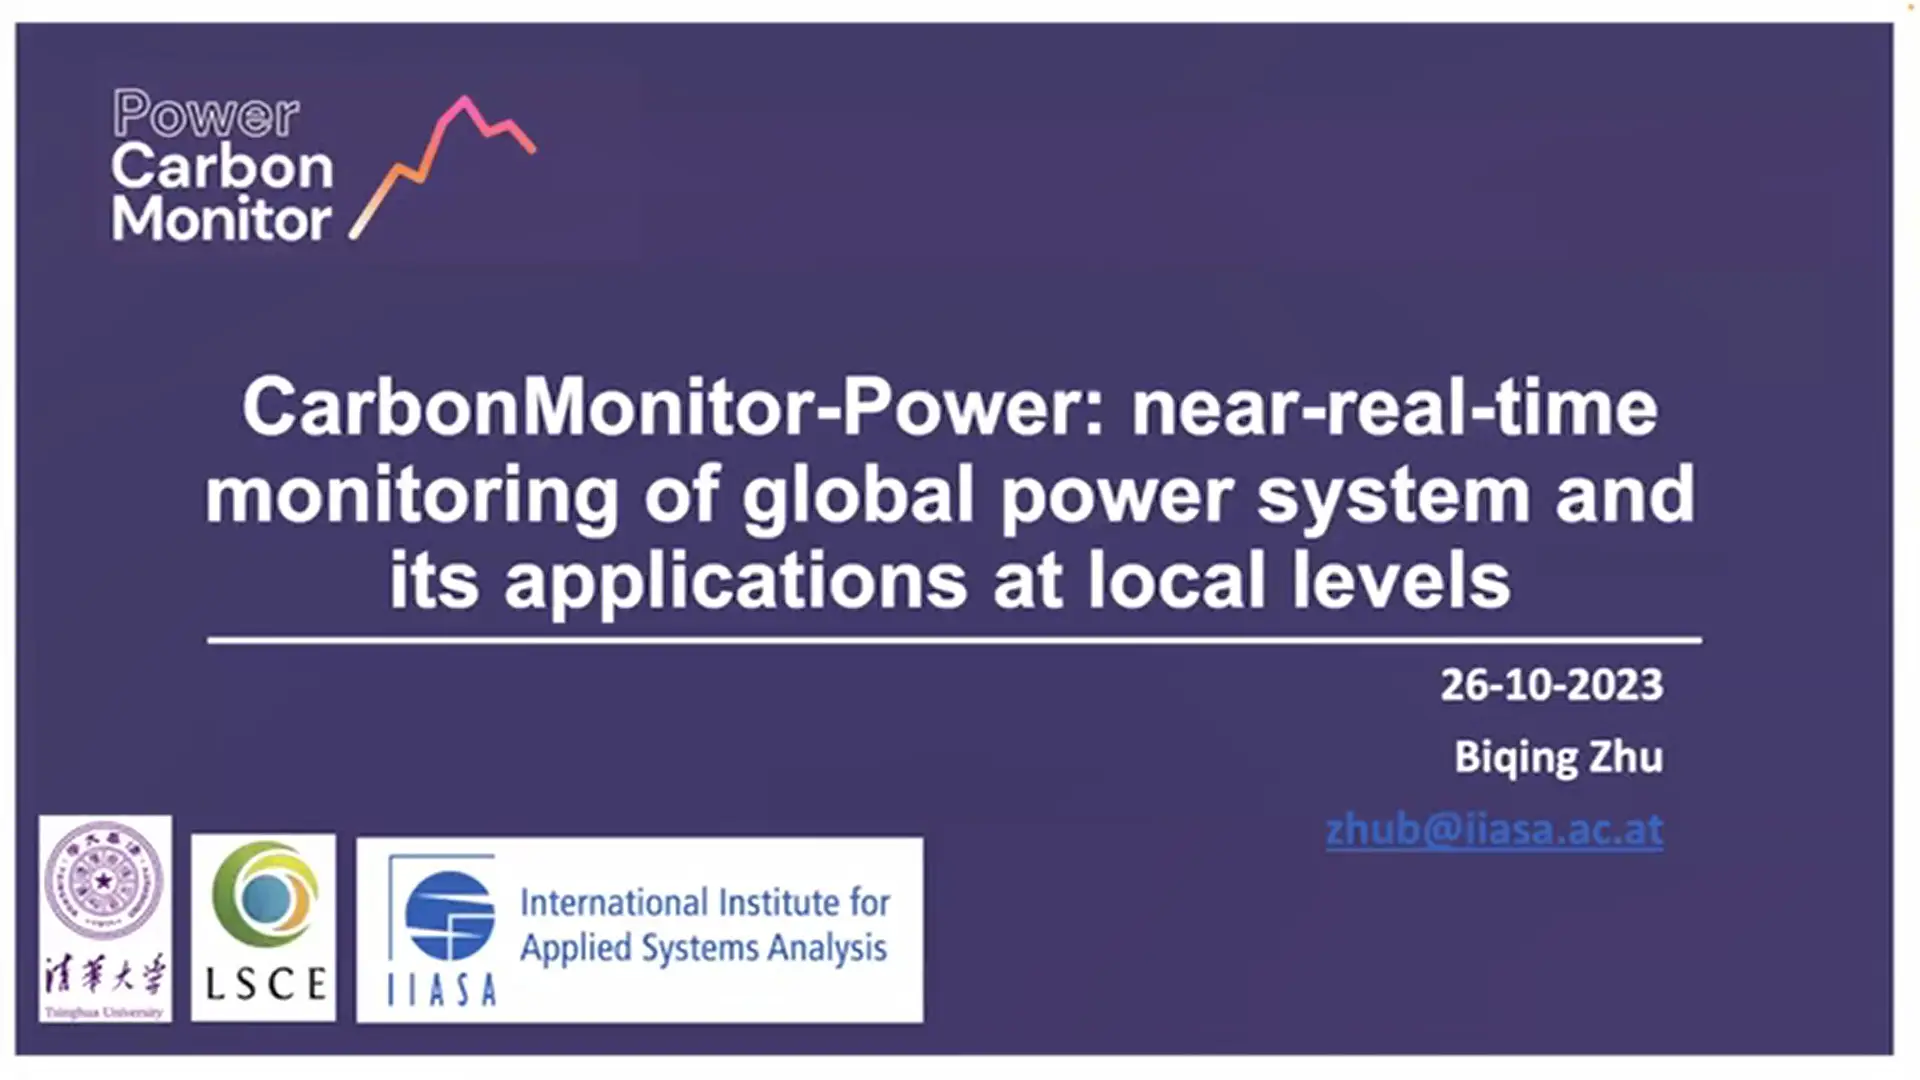 IEEE OFCCT 2023: Keynote 3.3: CarbonMonitor-Power: Near-Real-Time Monitoring of Global Power System and Its Applications at Local Levels